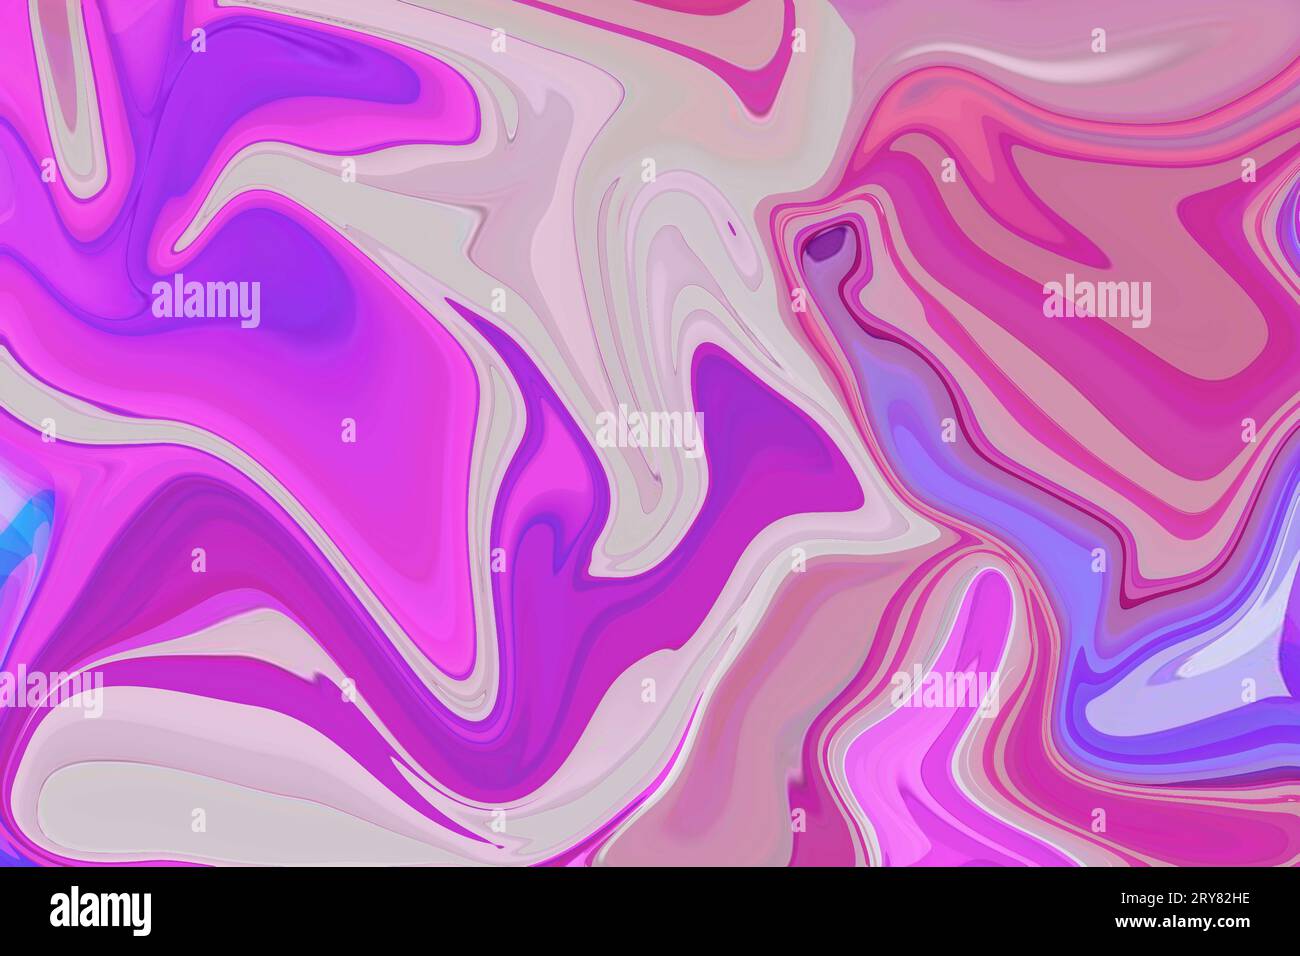 where creativity flows abstract colorful background with lilac and purple paint dynamically shaping an interesting structure Stock Photo